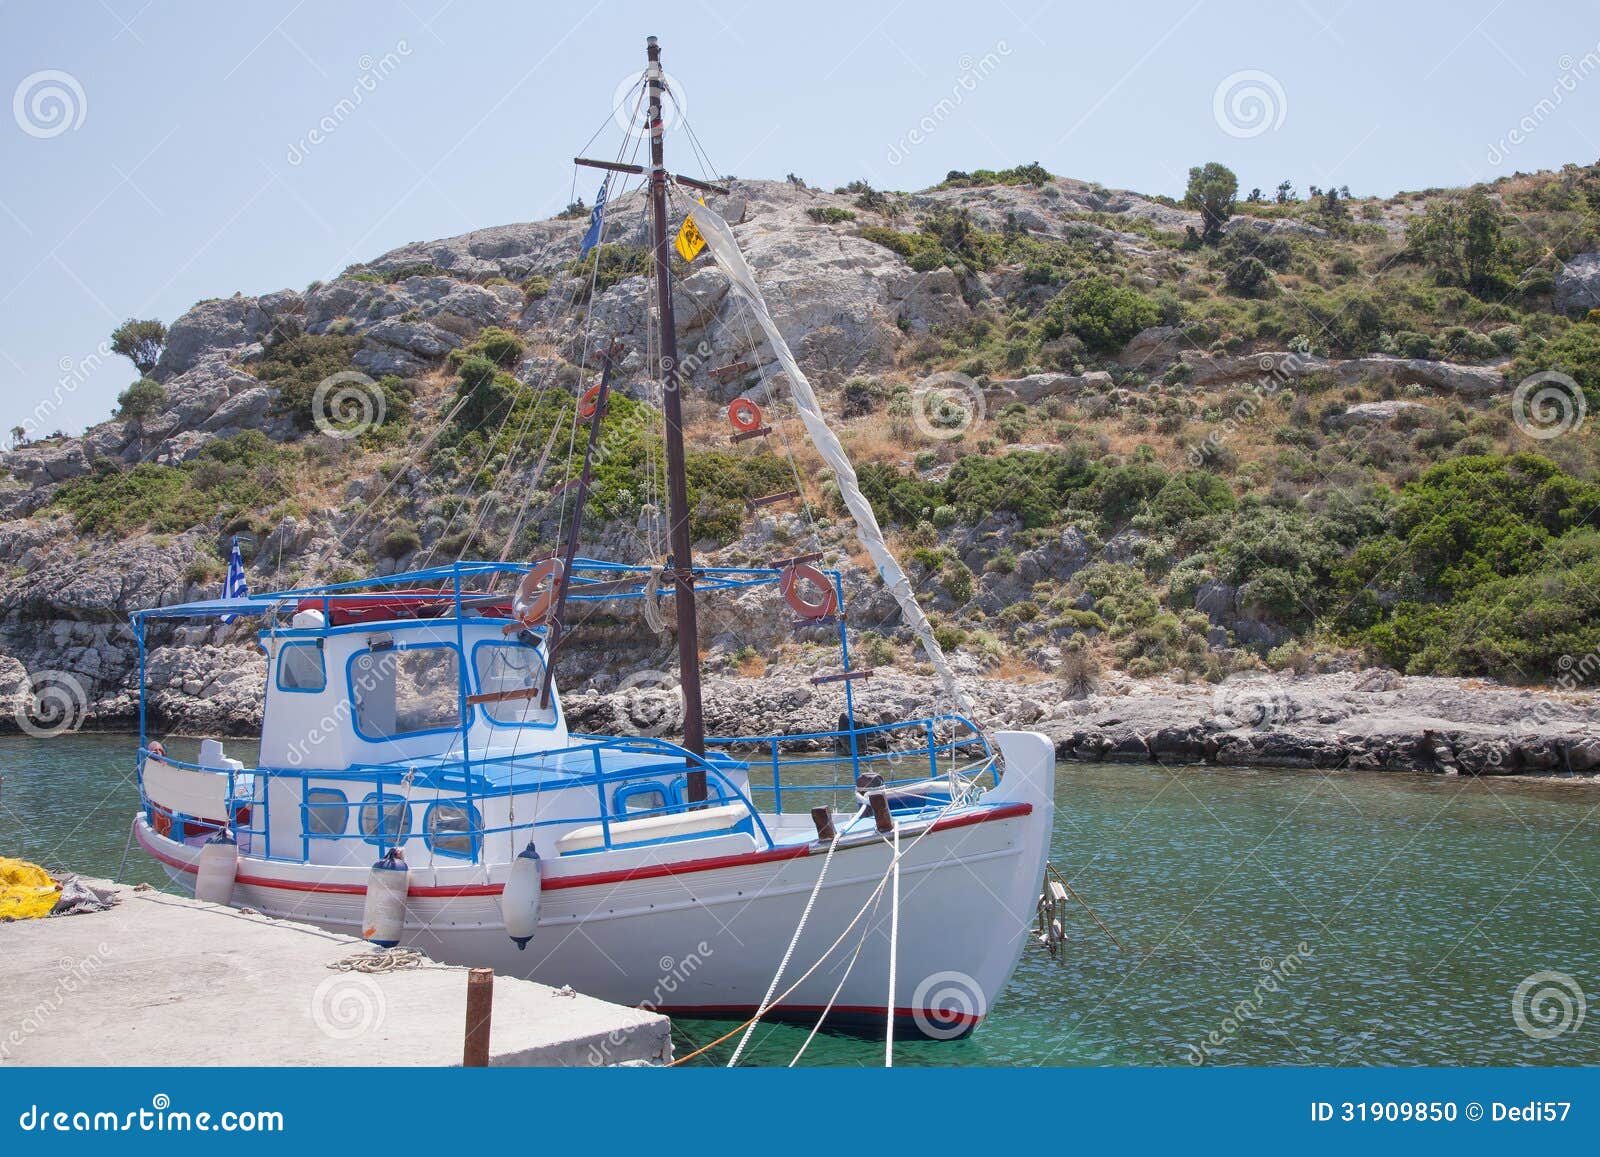 Fishing boat in the small harbor of Kolymbia on the island of Rhodes 